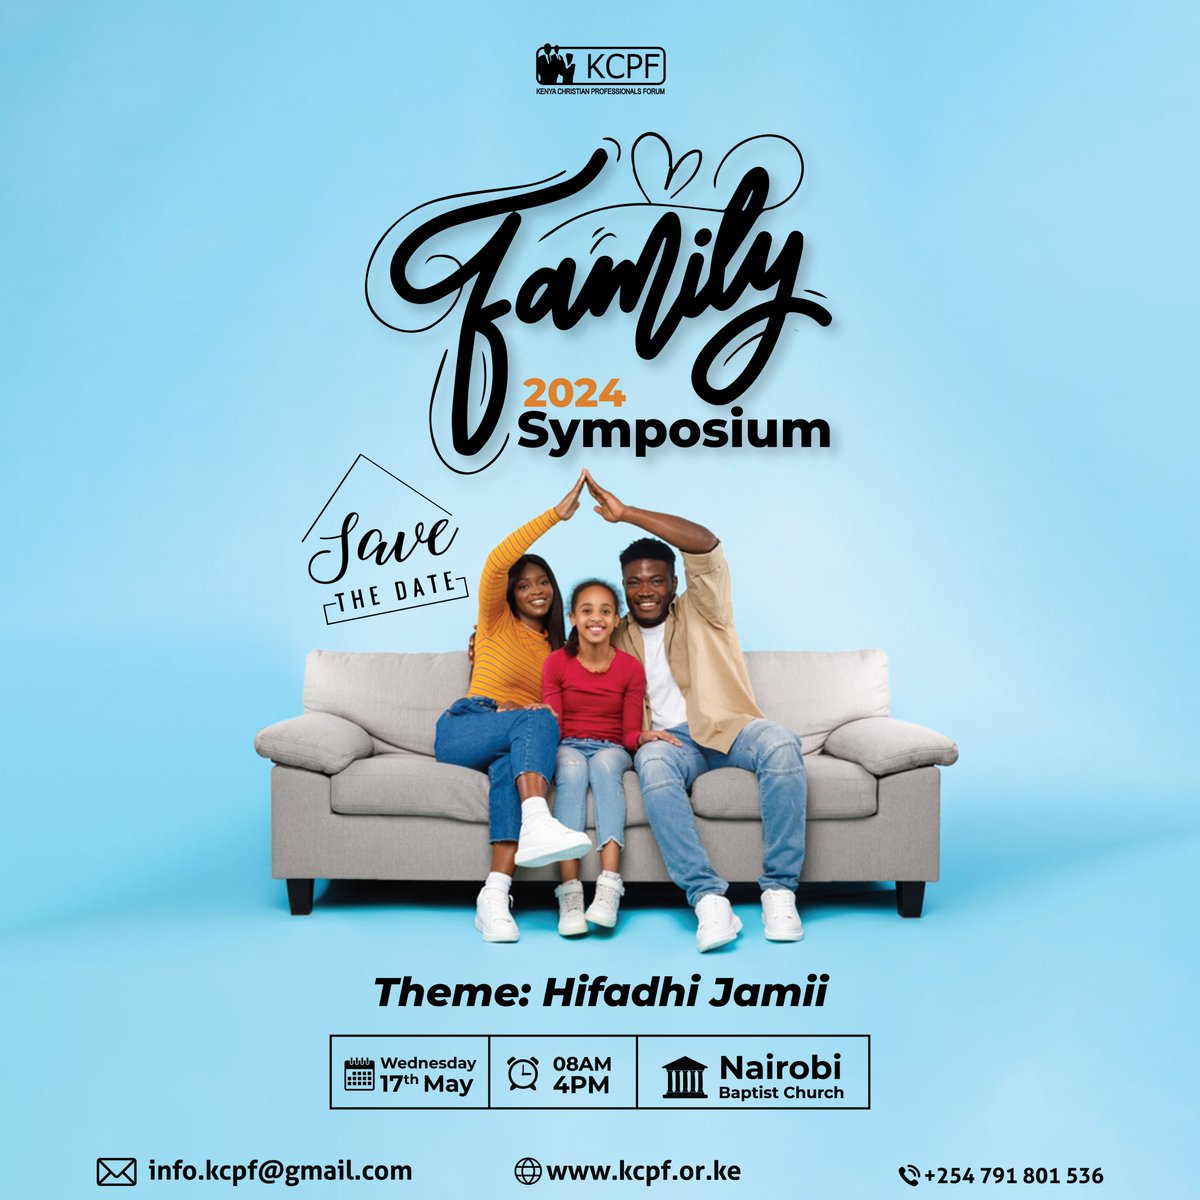 Save the Date ! Family symposium 2024 is happening on 17th May from 8am-4pm at the Nairobi Baptist Church. The theme is ' HIFADHI JAMII'